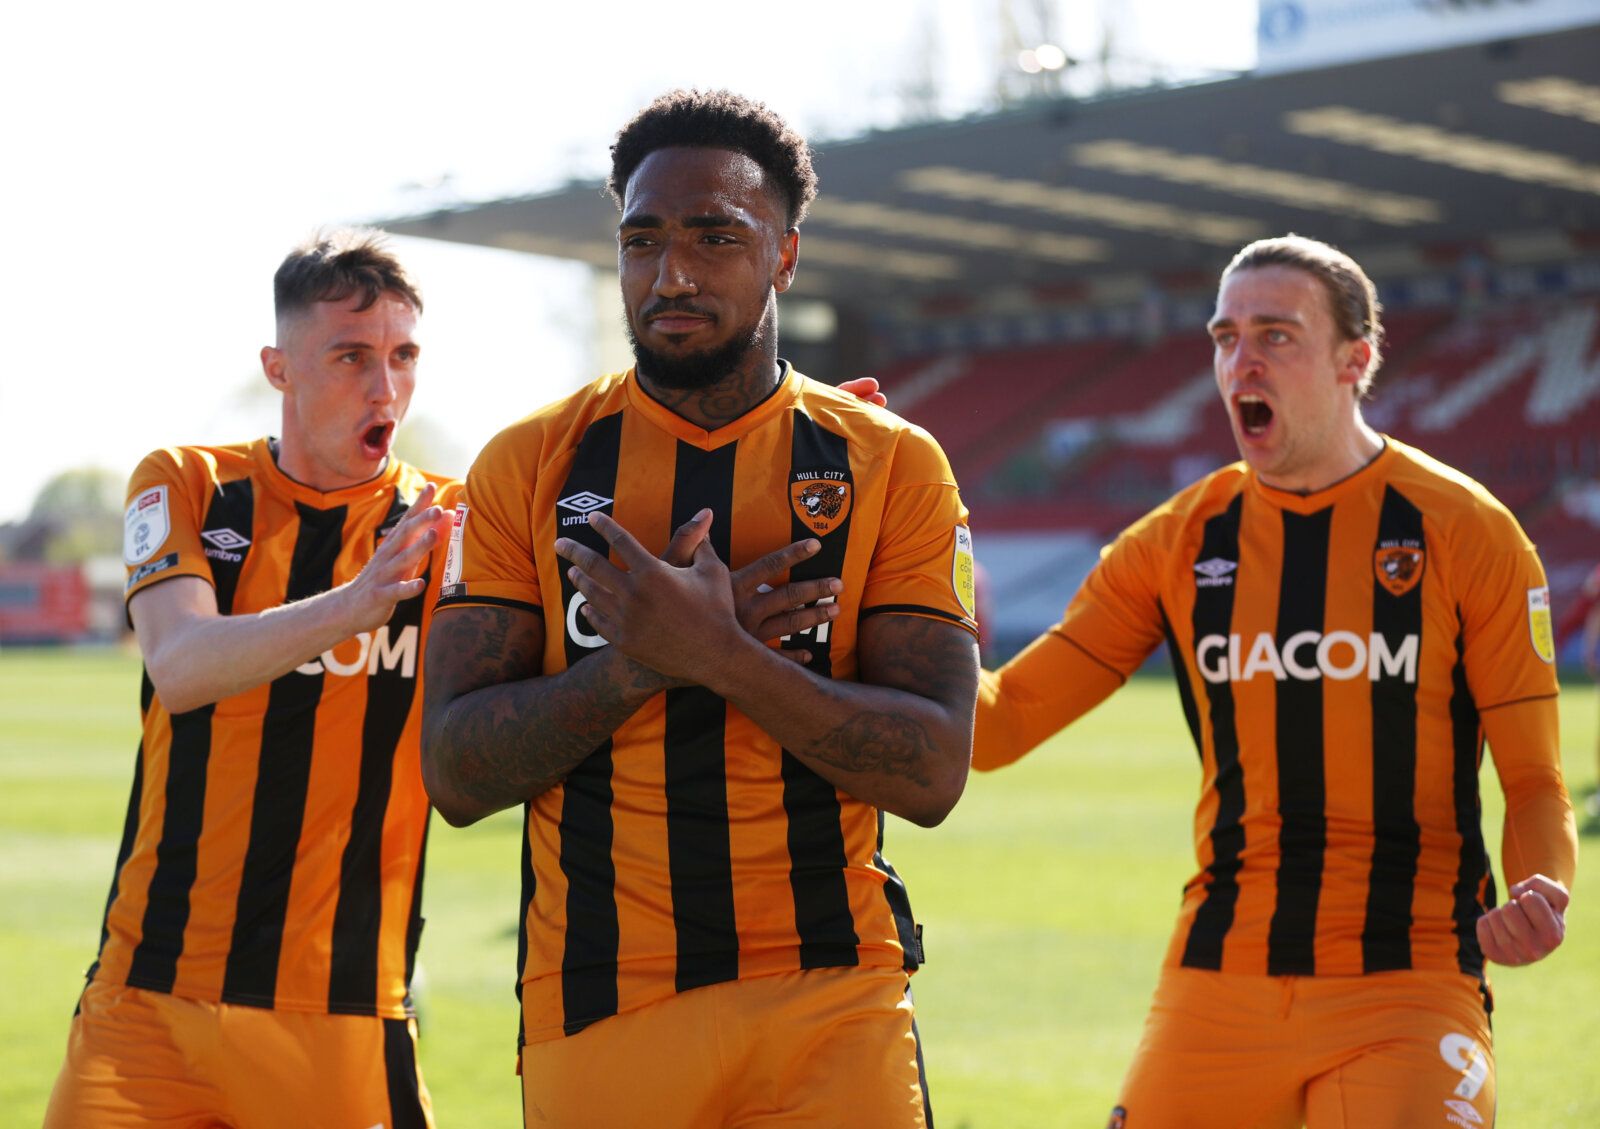 Soccer Football - League One - Lincoln City v Hull City - Sincil Bank, Lincoln, Britain - April 24, 2021 Hull City's Mallik Wilks celebrates after scoring their second goal with teammates Action Images/Molly Darlington EDITORIAL USE ONLY. No use with unauthorized audio, video, data, fixture lists, club/league logos or 'live' services. Online in-match use limited to 75 images, no video emulation. No use in betting, games or single club /league/player publications.  Please contact your account rep